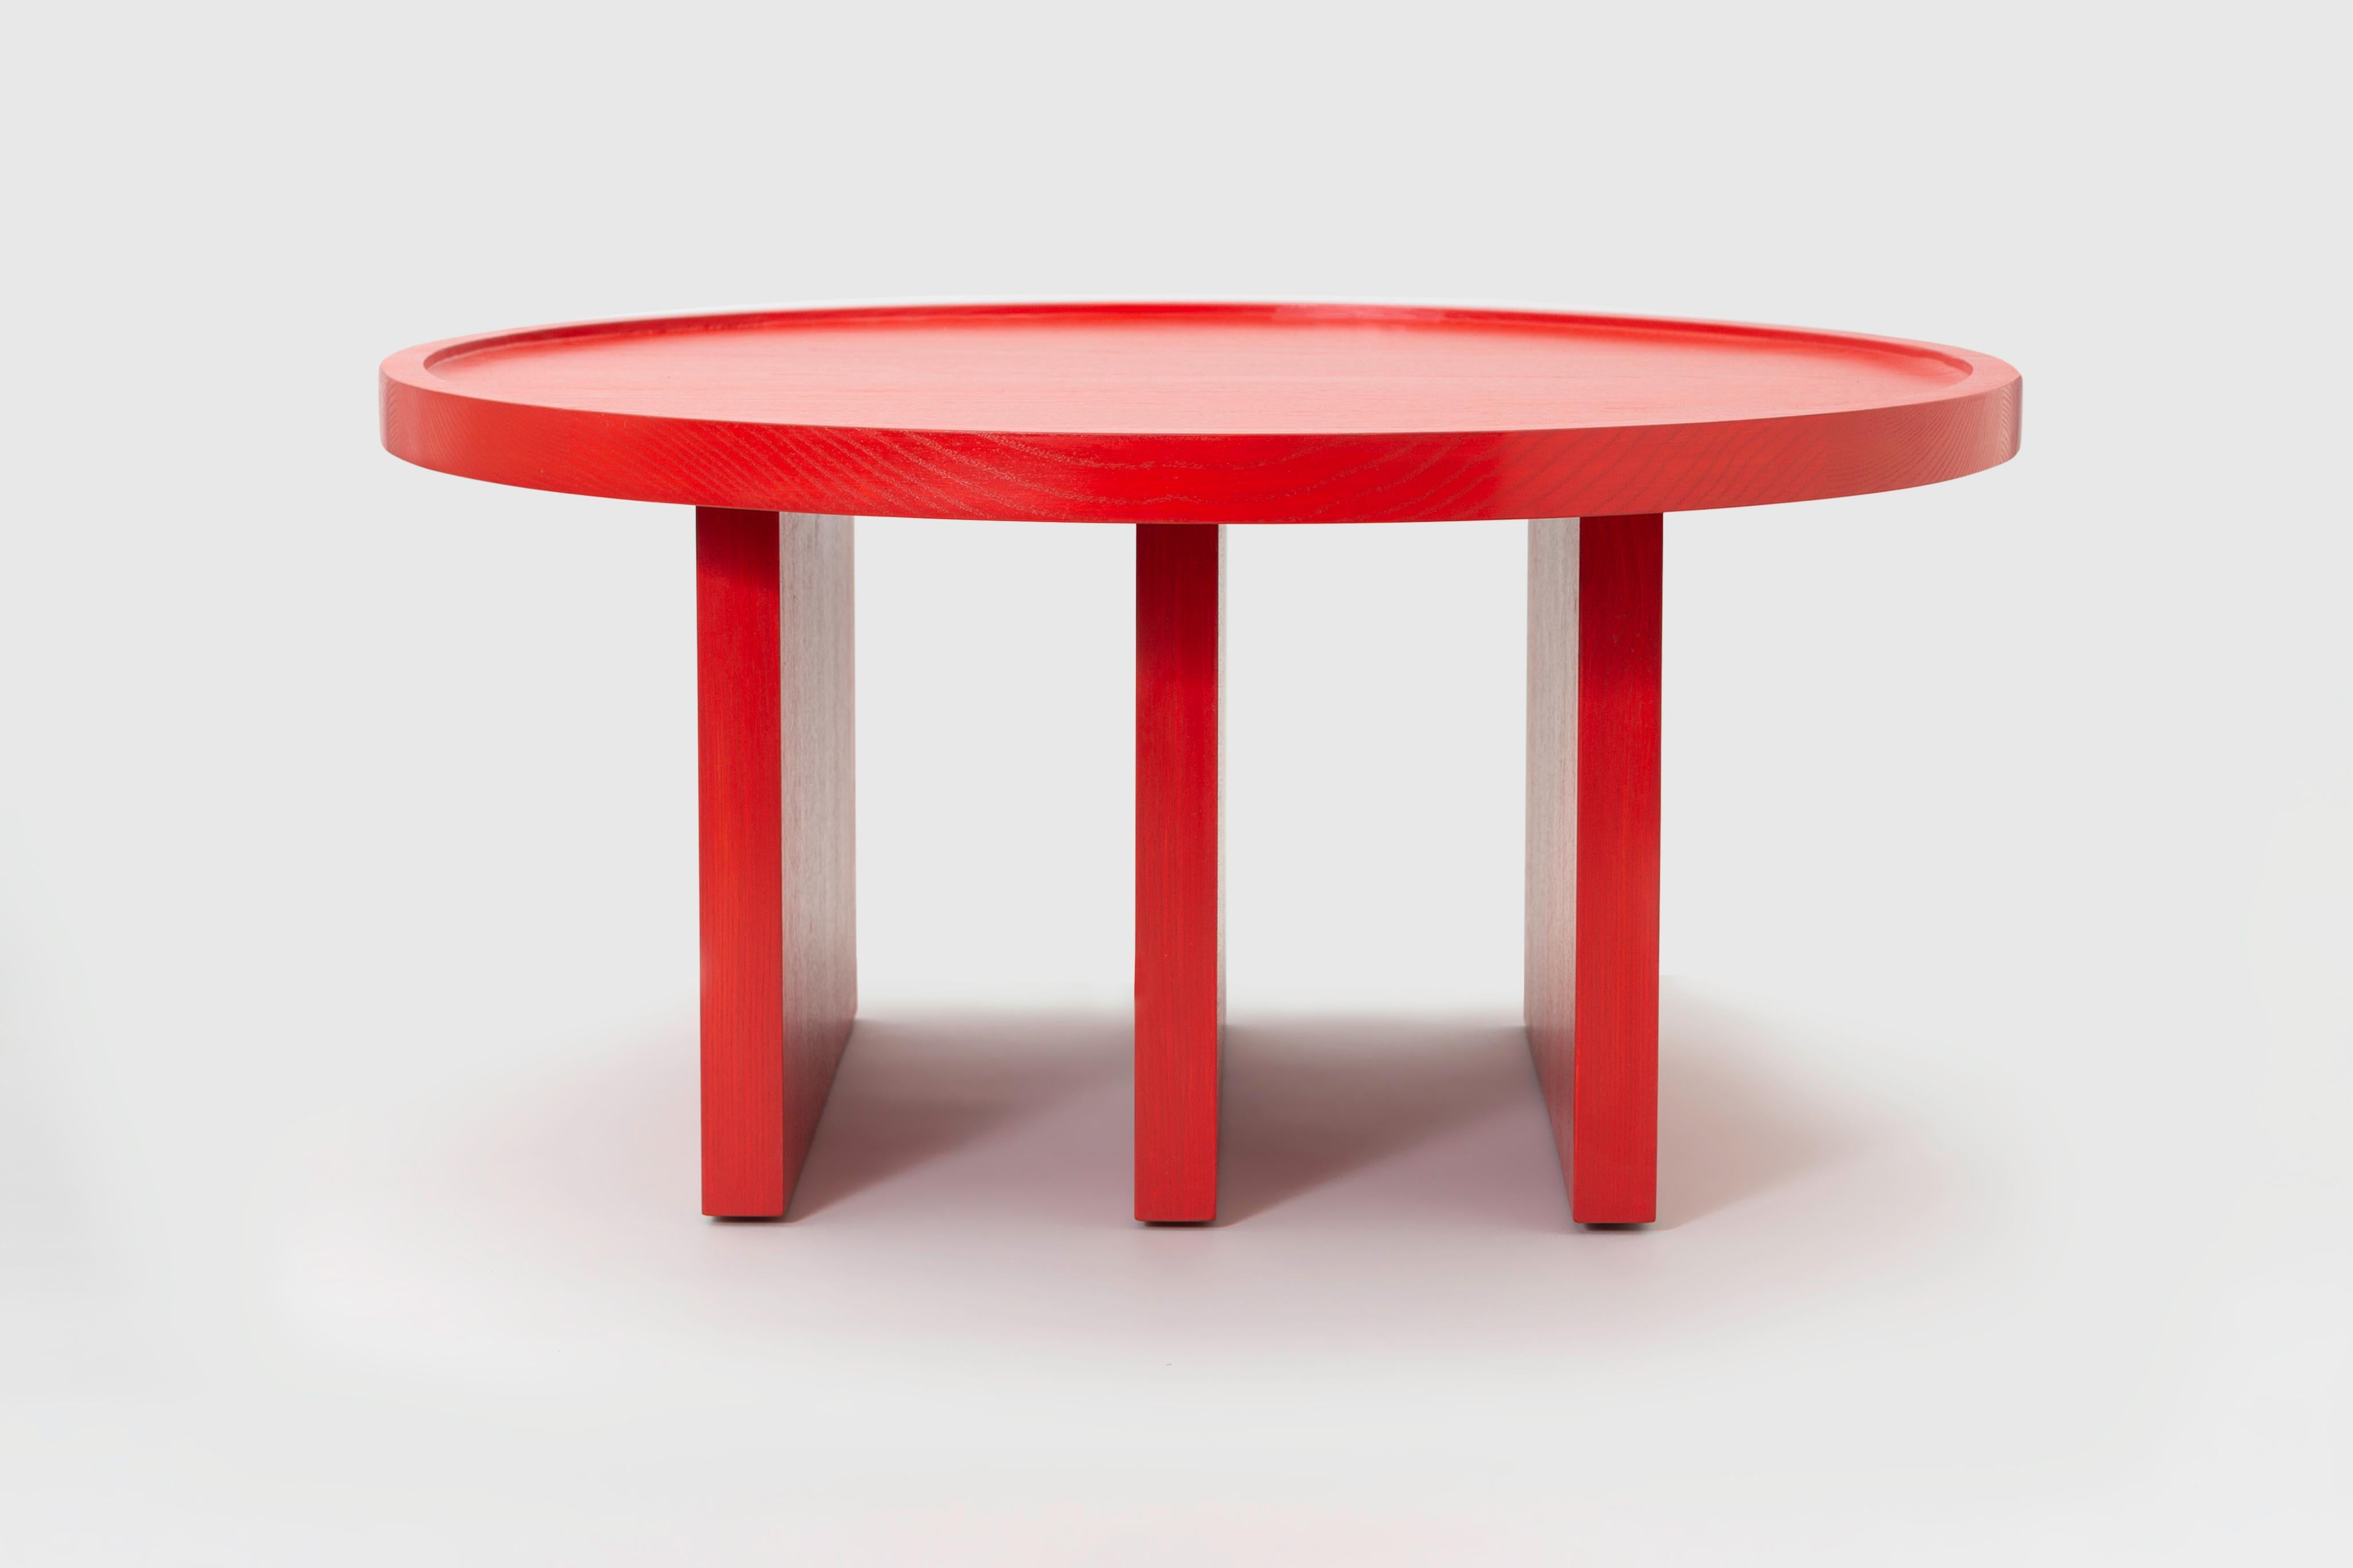 ODD is a minimalist table created by Berlin-based designer Lucas Faber. The unconventional piece references bold architectural structures and graphic patterns in equal measure. The simple geometries that form the legs and tabletop are